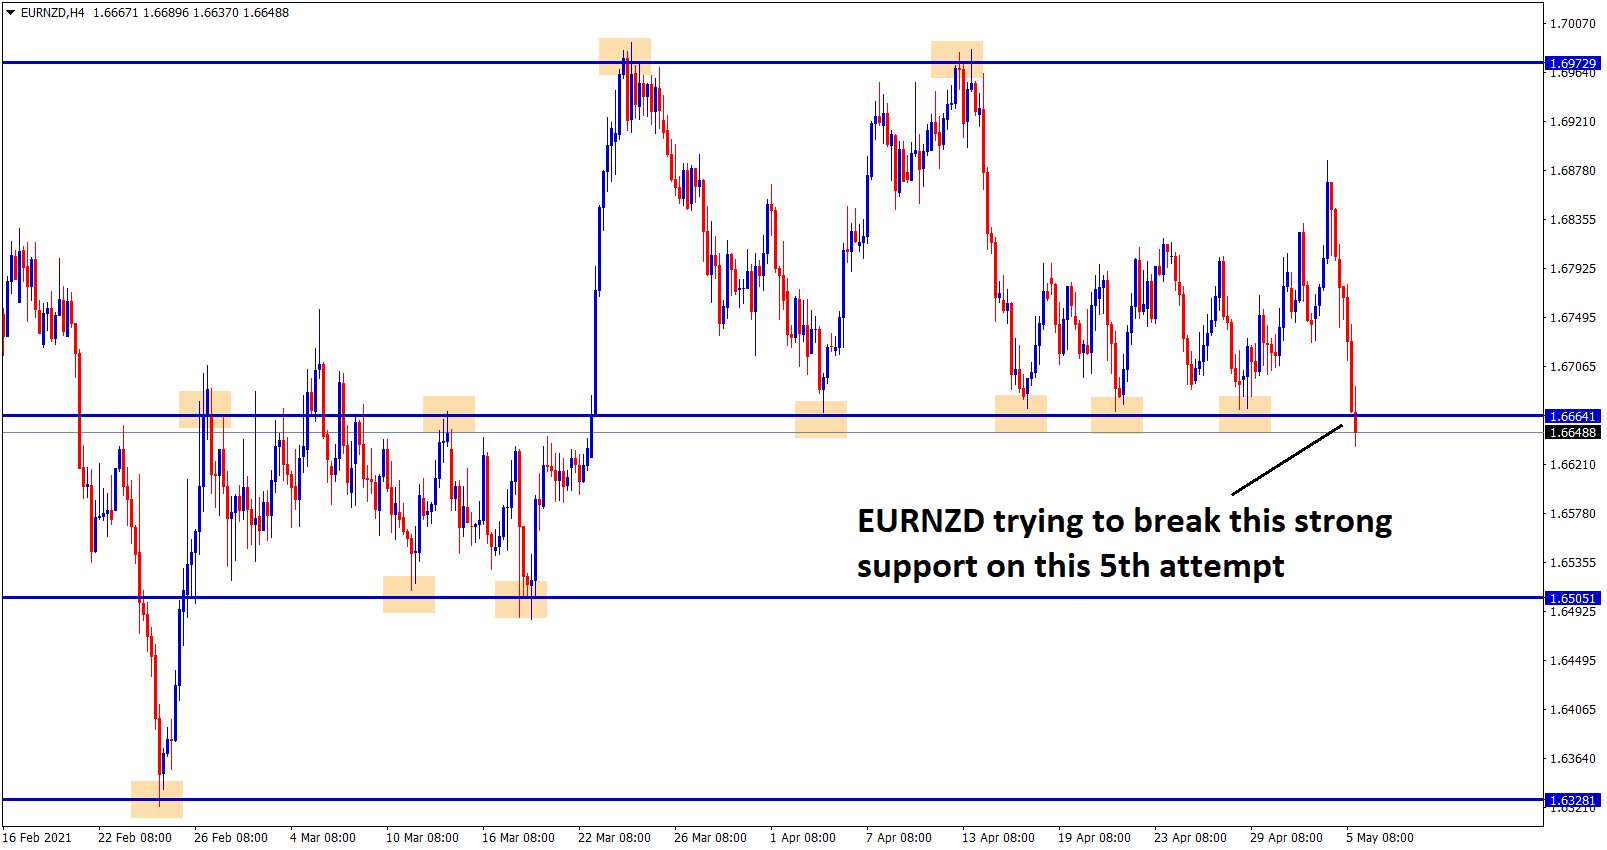 eurnzd trying to break the support zone